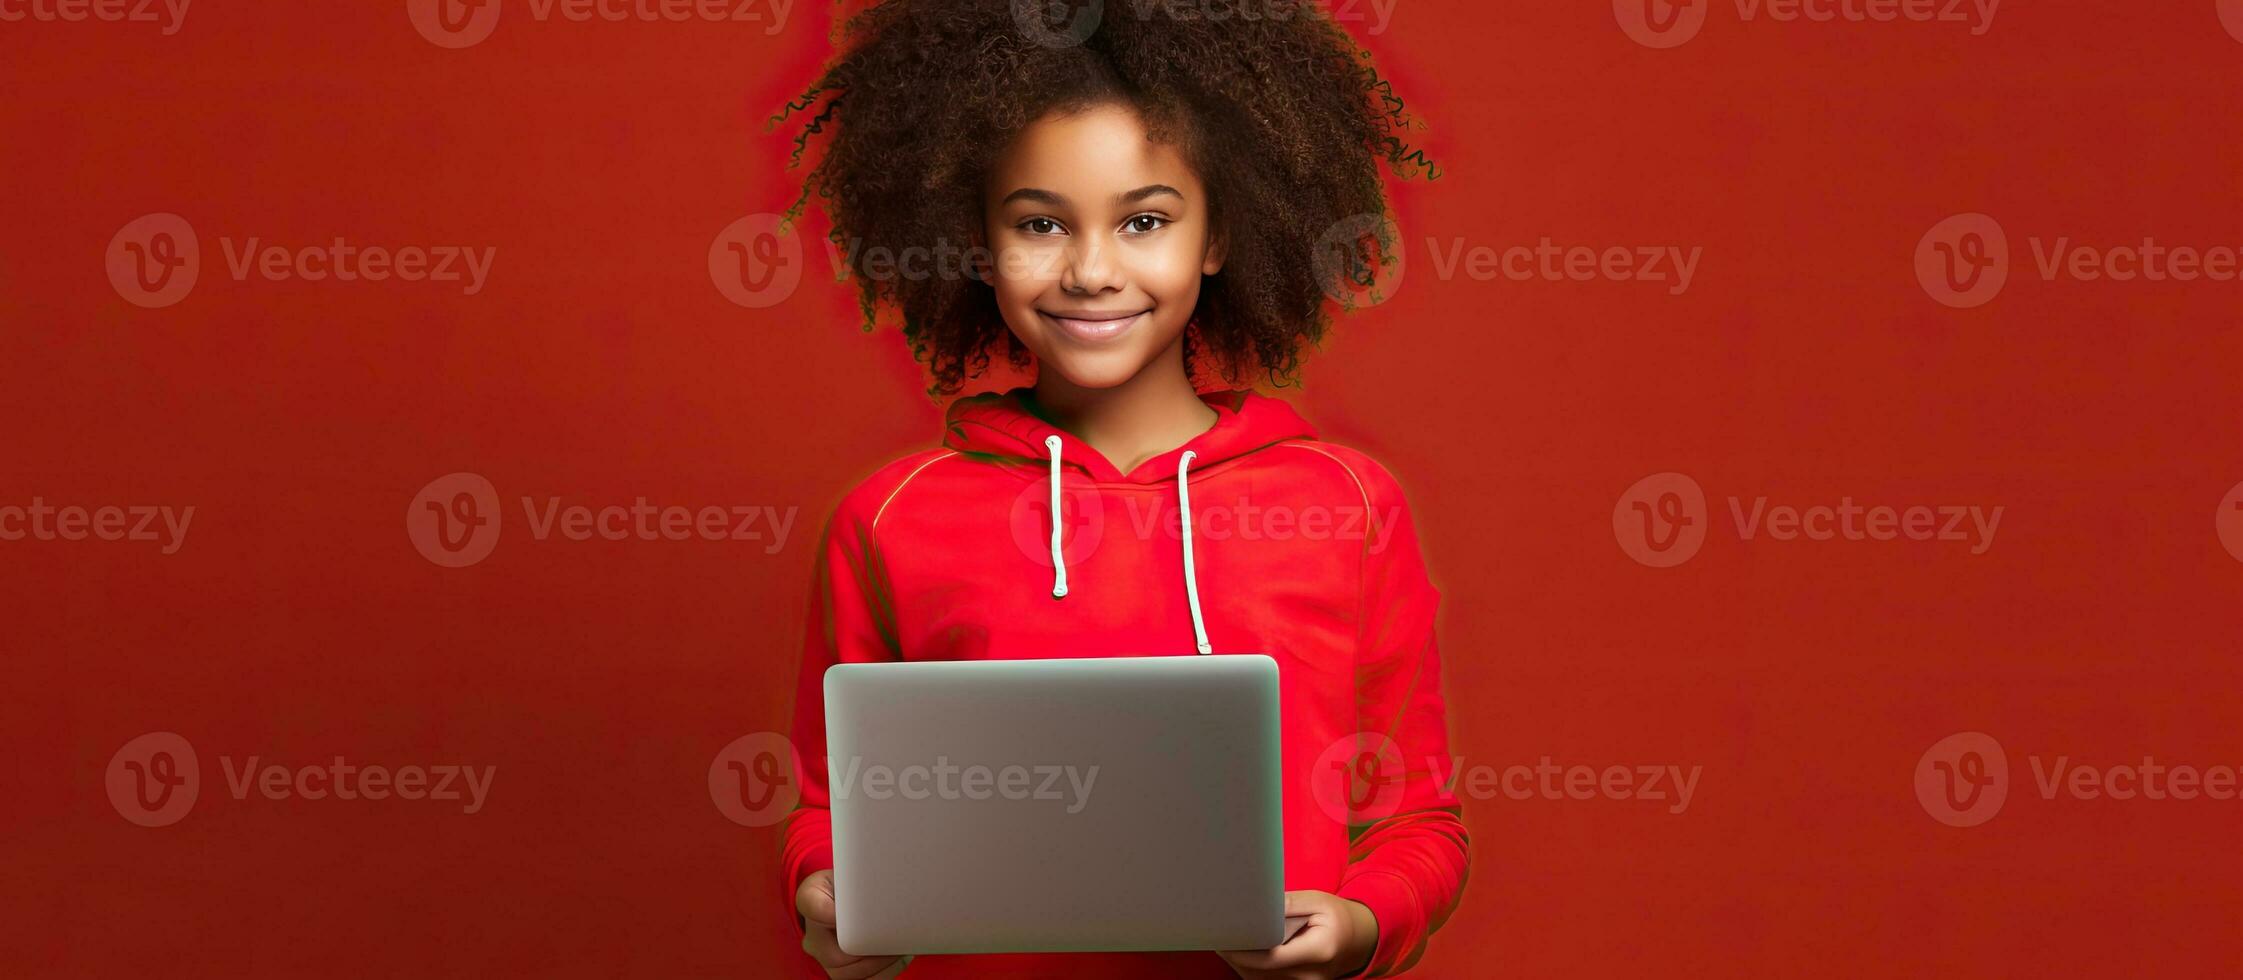 Smiling young African American girl with laptop on red wall background studio portrait People lifestyle concept Mock up copy space photo